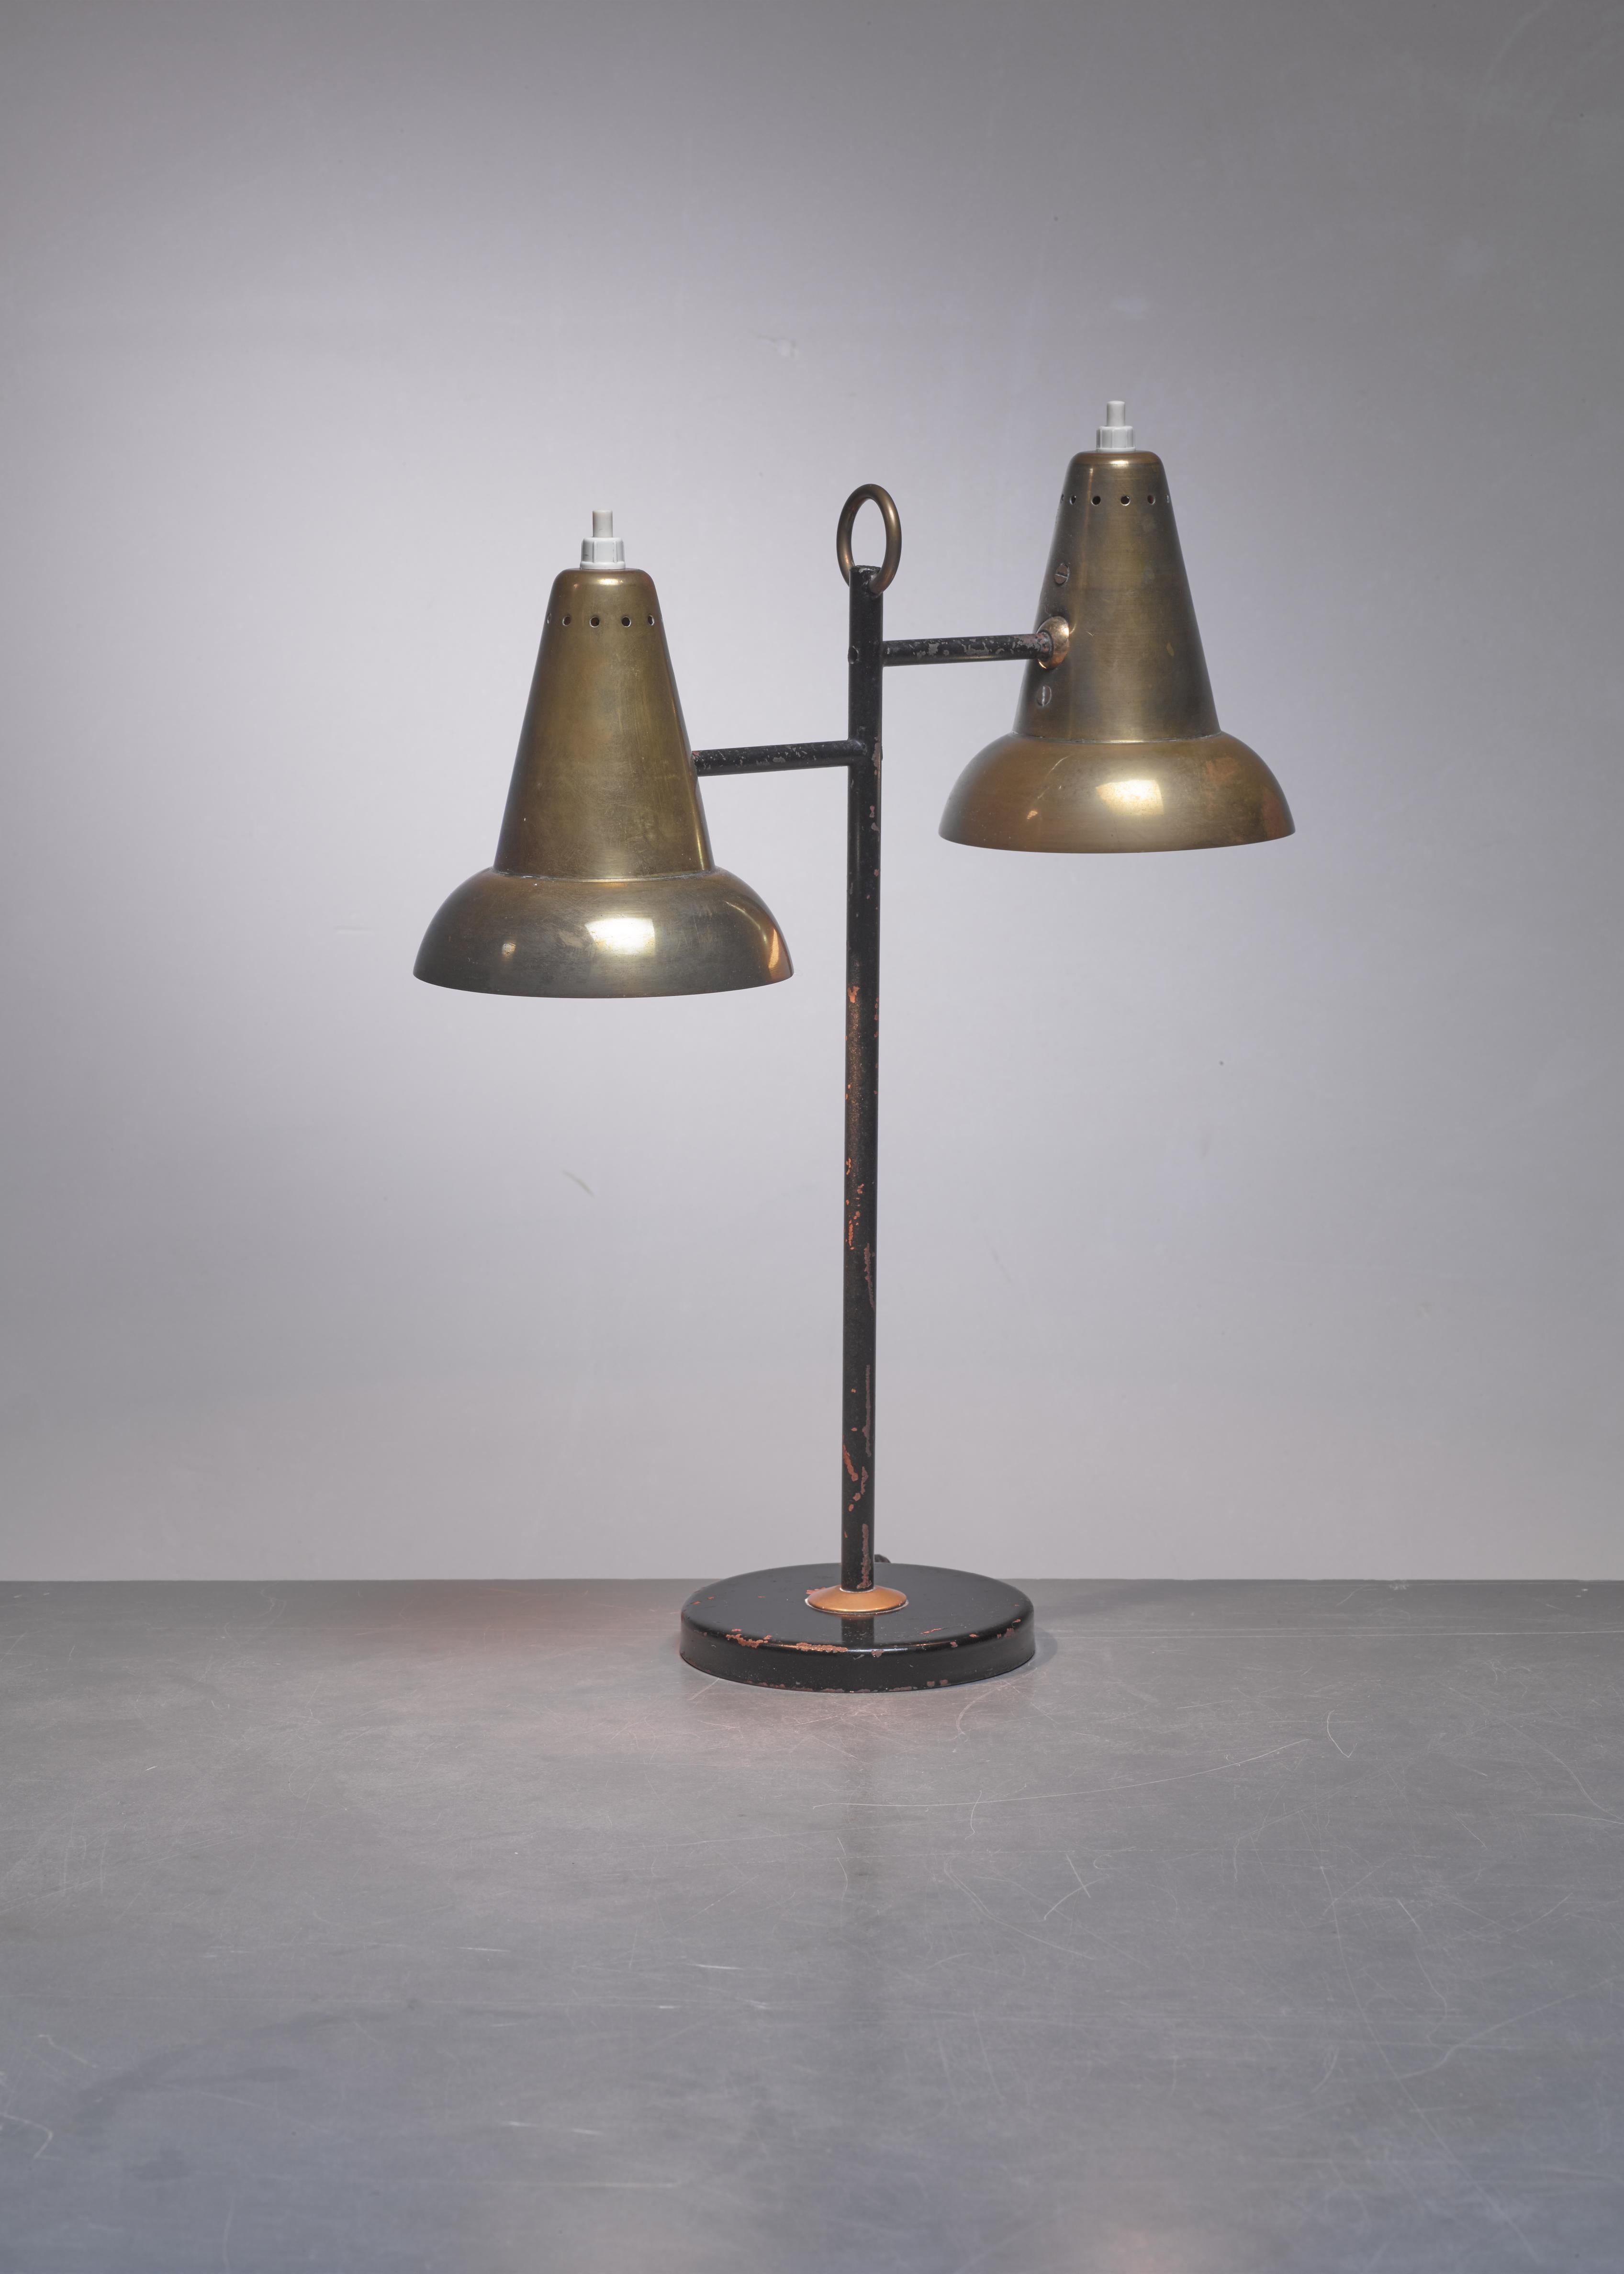 Mid-Century Modern Metal and Brass Table Lamps with Two Hoods, France, 1950s For Sale